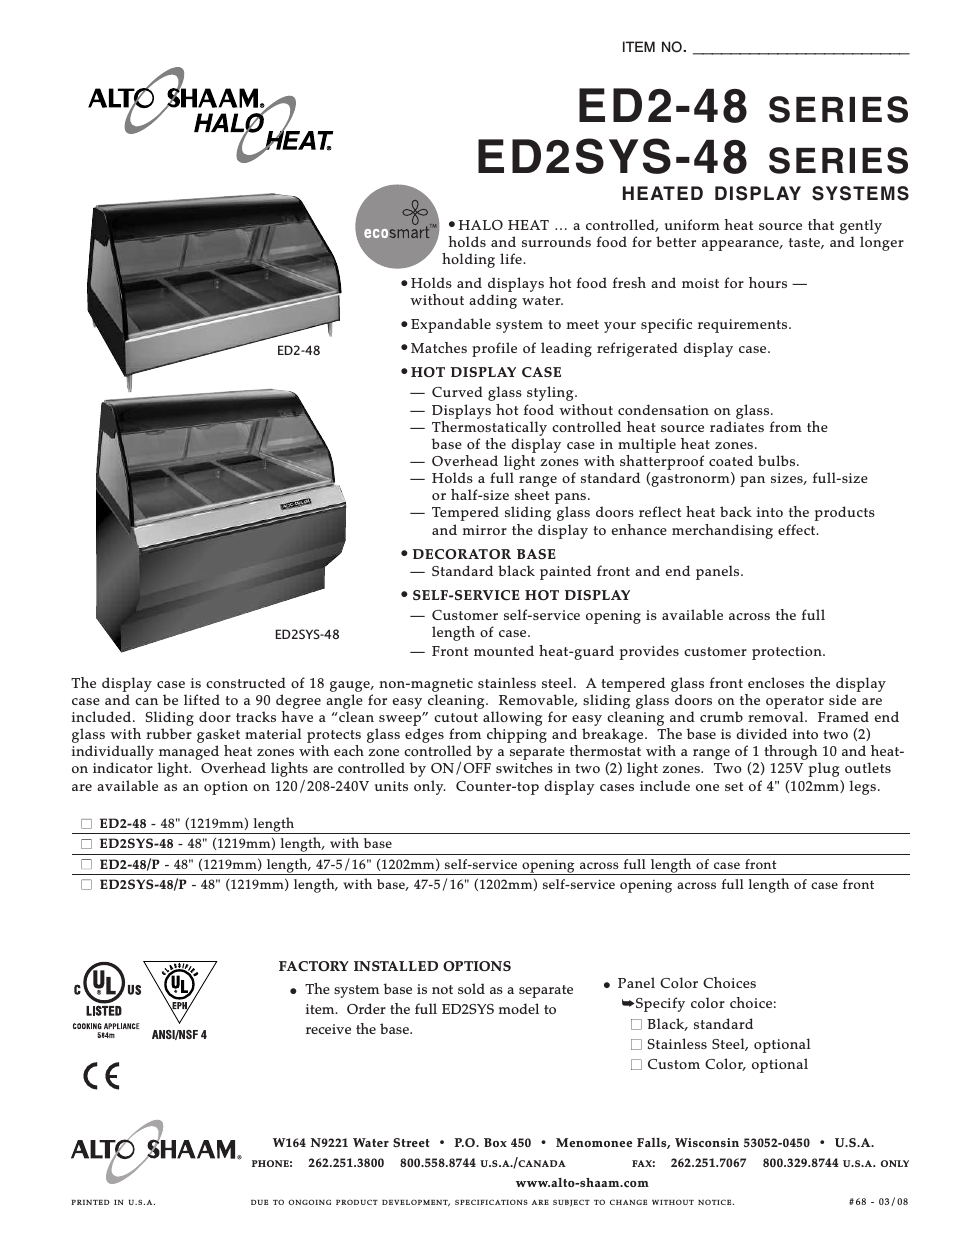 ED2SYS-48